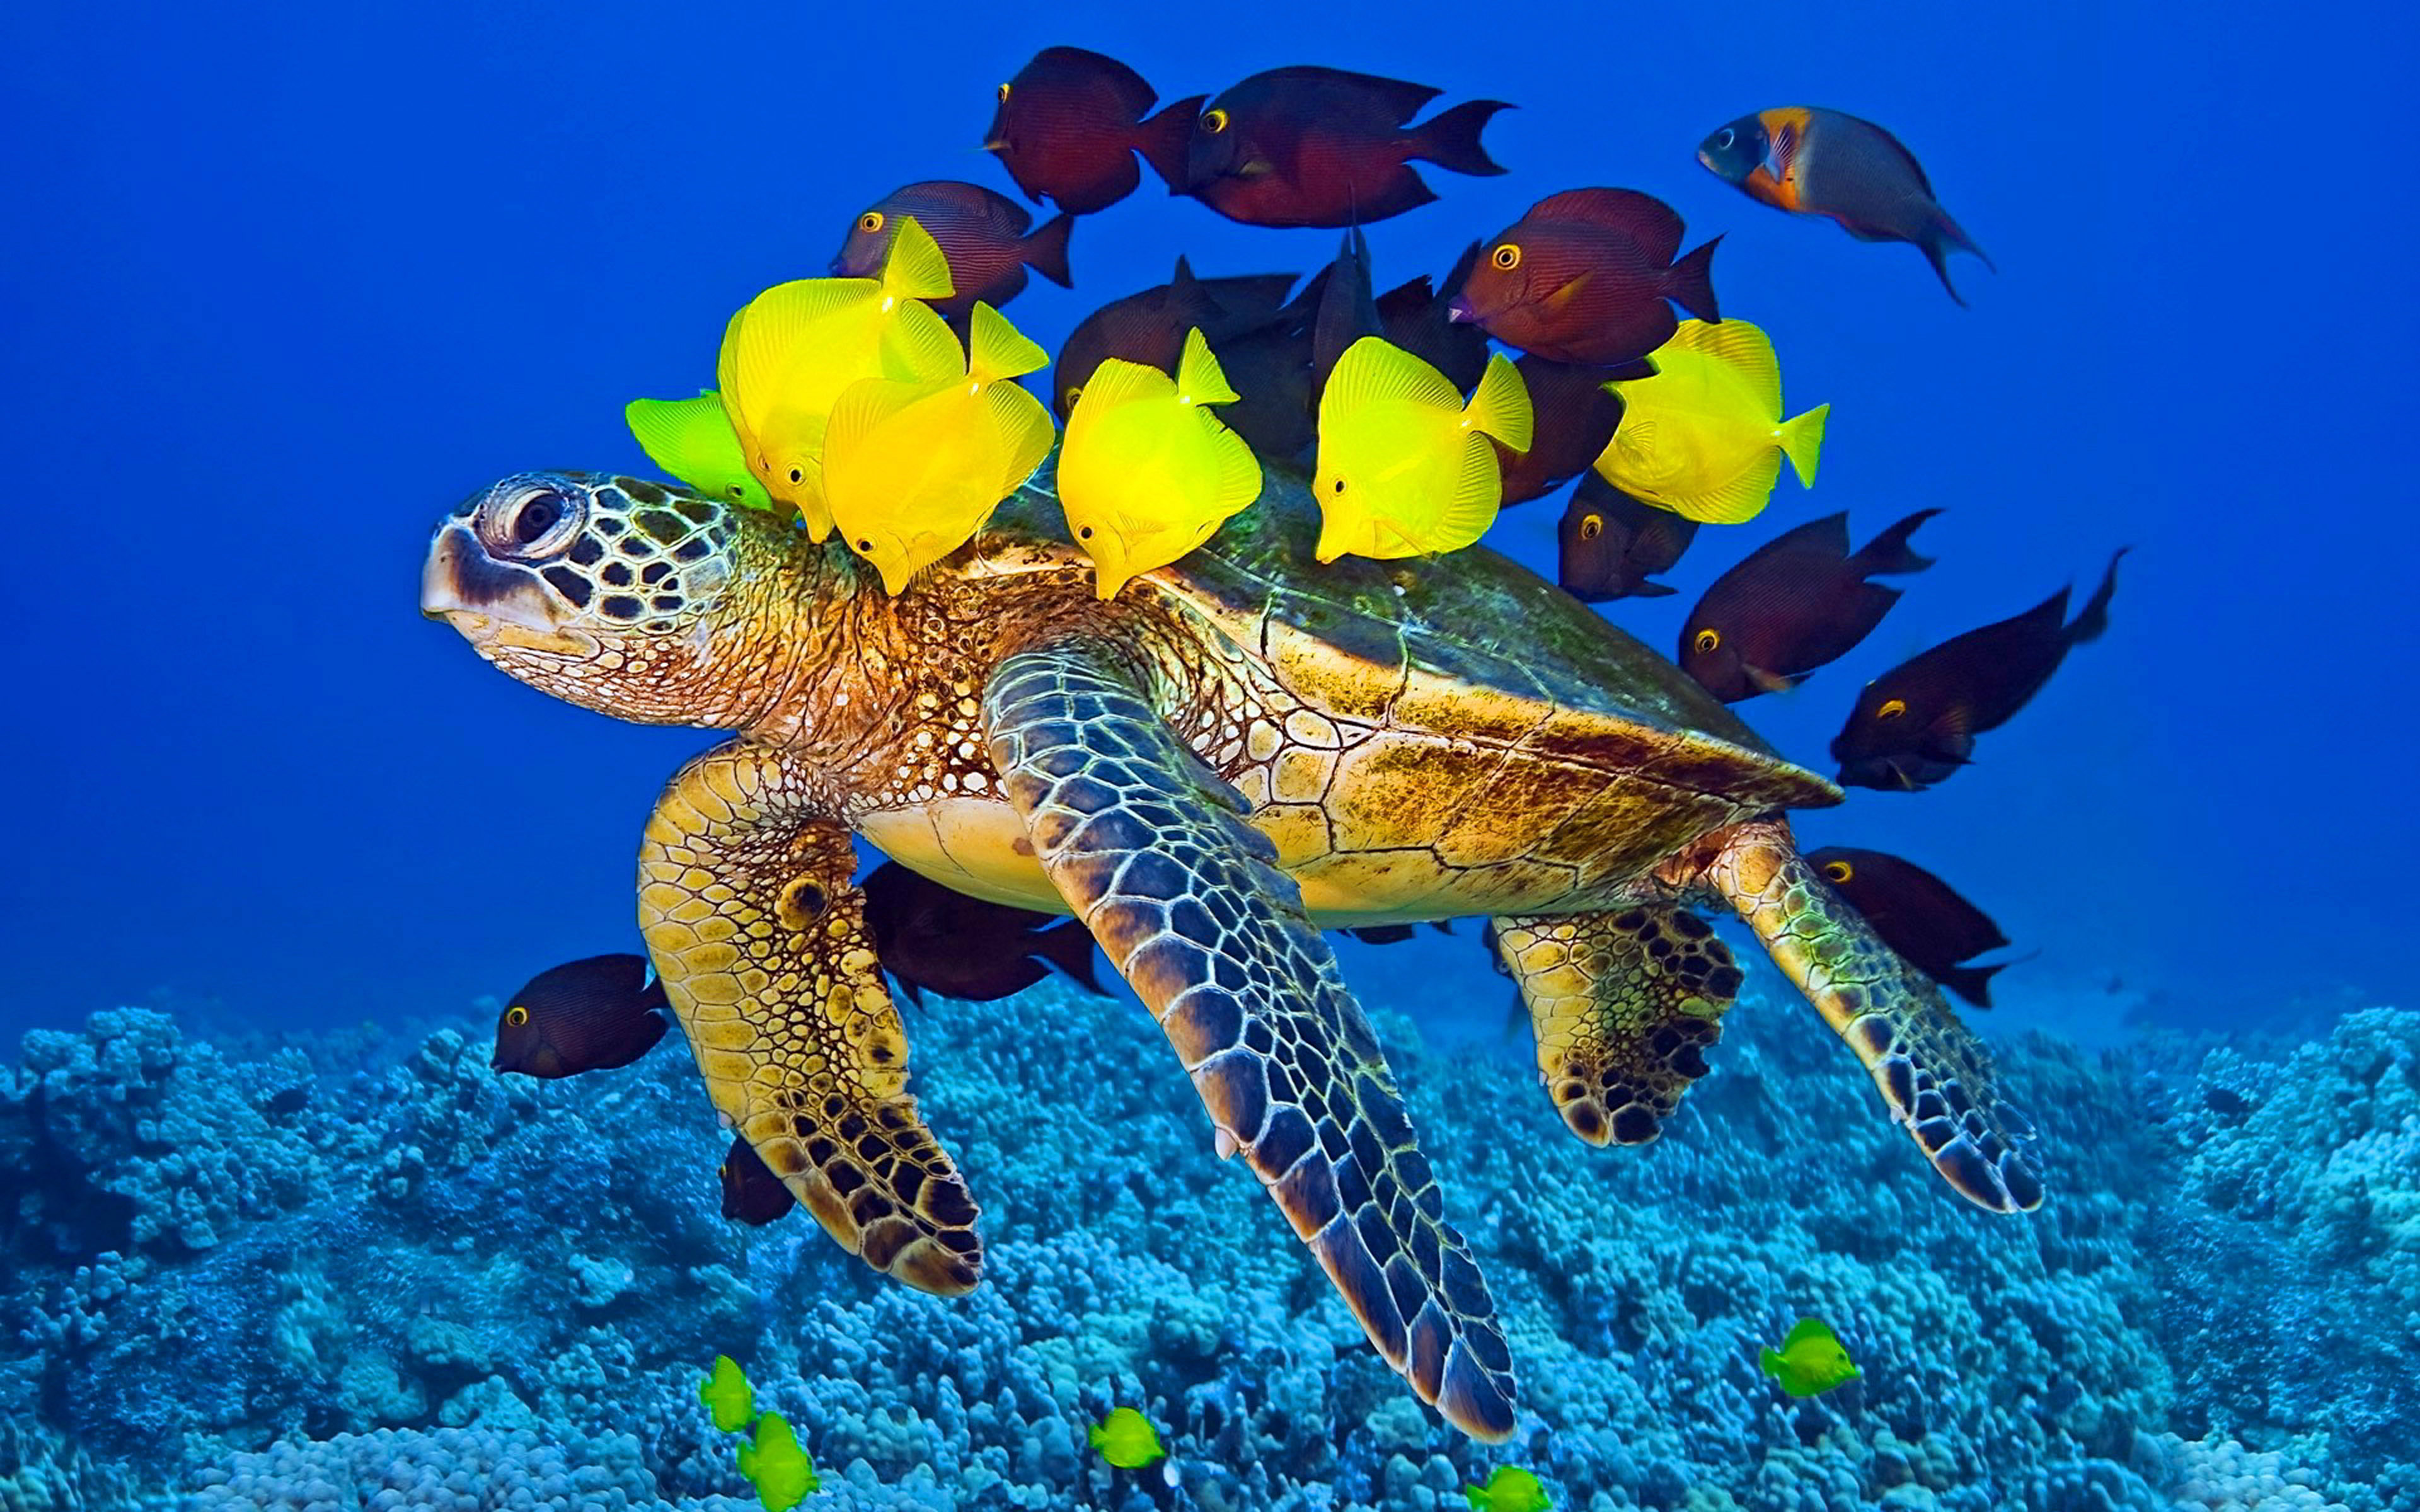 Sea Turtle And Fish Wallpaper Hd For Laptop Mobile Phone Wallpapers13.com